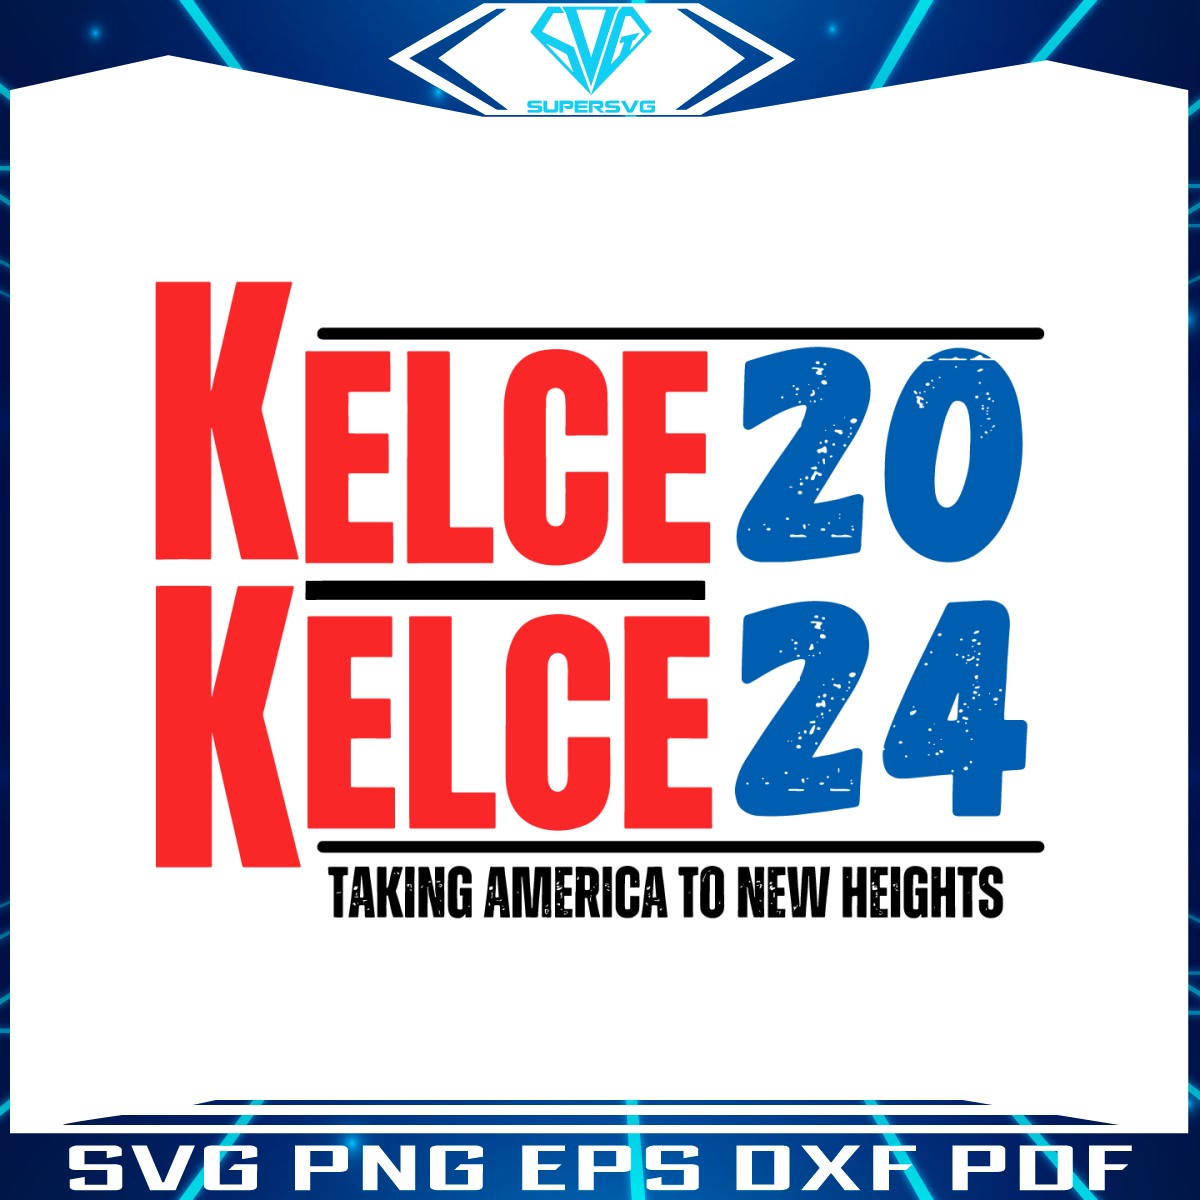 kelce-2024-taking-america-to-new-heights-svg